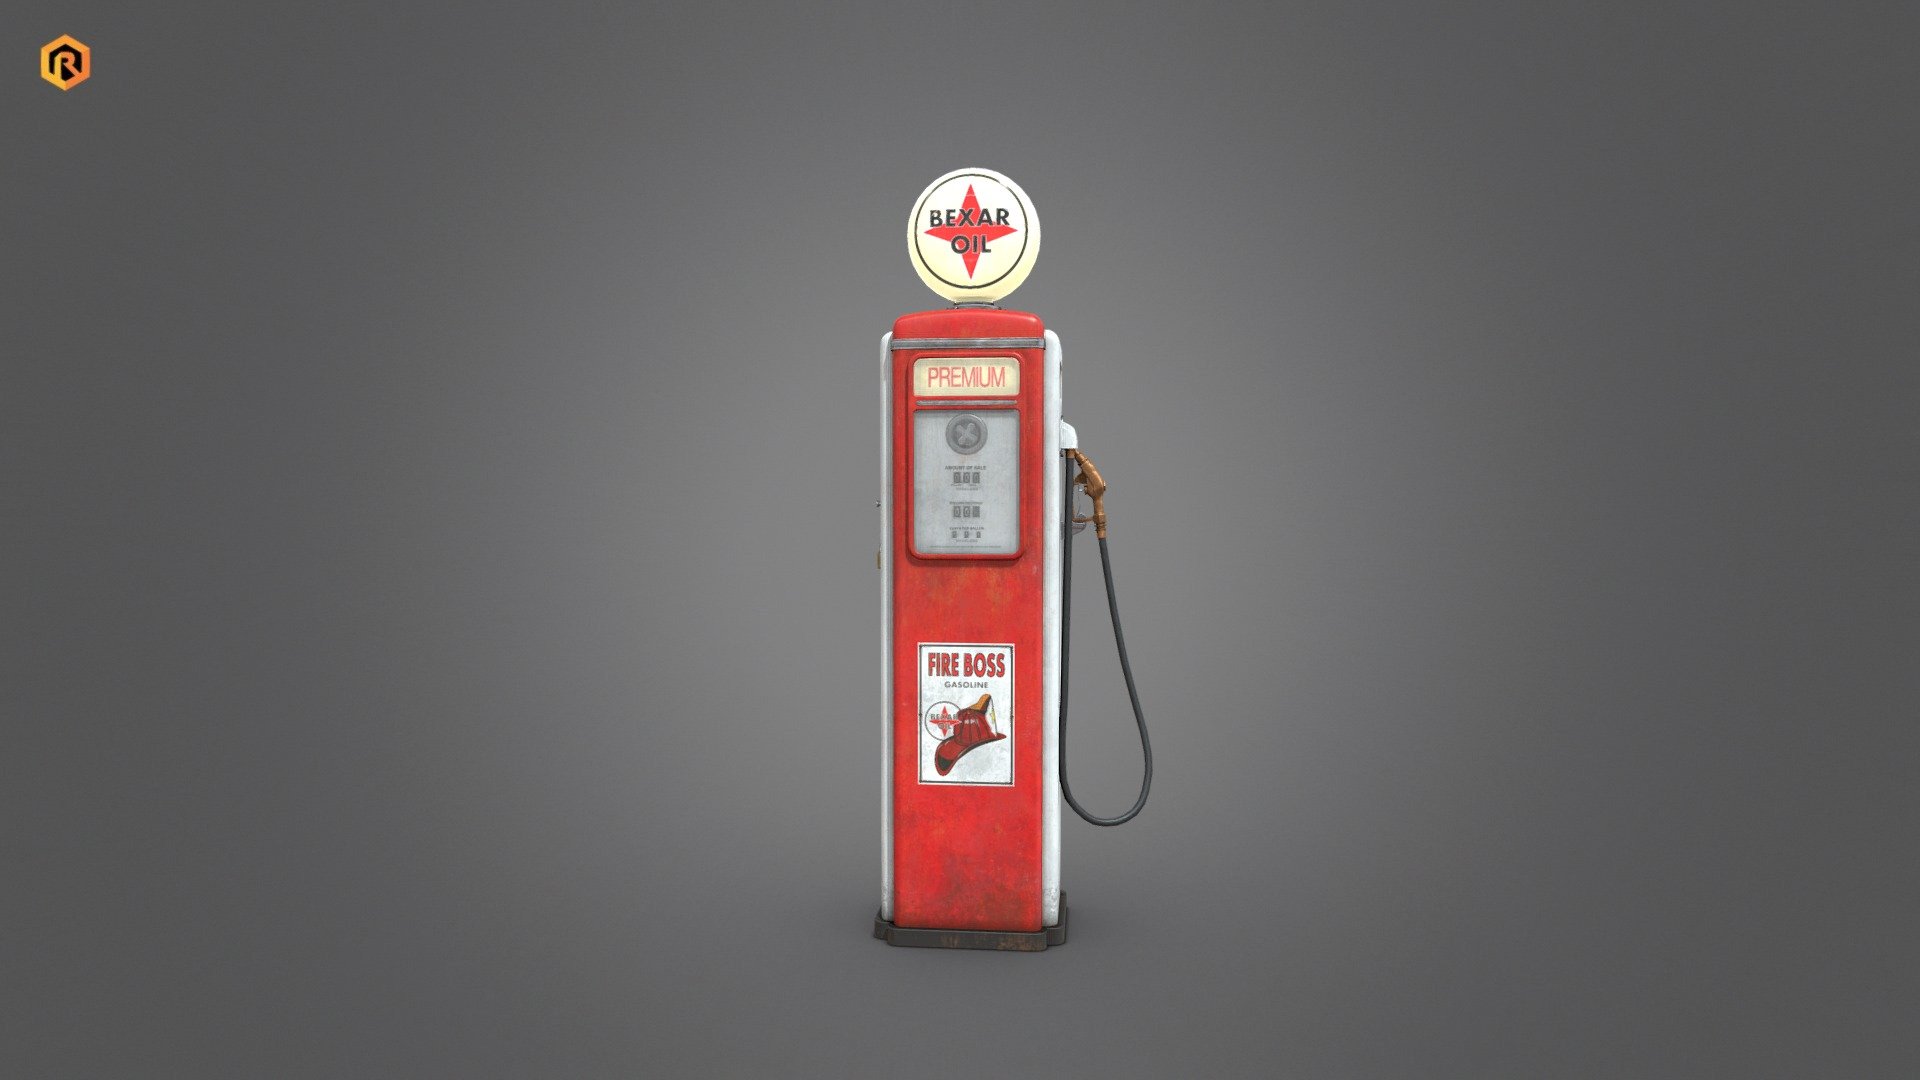 Low-poly PBR 3D model of Old Style Gas Pump.

This asset is best for use in games and other VR/AR, real-time applications such as Unity or Unreal Engine.  It can also be rendered in Blender (ex Cycles) or Vray as the model is equipped with all required PBR textures.  Enjoy!

This is a regular, free version but you can support me and download **PRO version ** (with sources) from here: https://skfb.ly/oFEZJ

Technical details:




3 PBR textures sets. (Main body, emission, alpha) 

7613 Triangles.

6691  Vertices.

Model is one mesh.

Lot of additional file formats included (Blender, Unity, Maya etc.)  

More file formats are available in additional zip file on product page (See all files)

Please feel free to contact me if you have any questions or need any support for this asset.

Support e-mail: support@rescue3d.com - Vintage Gas Pump - Download Free 3D model by Rescue3D Assets (@rescue3d) 3d model